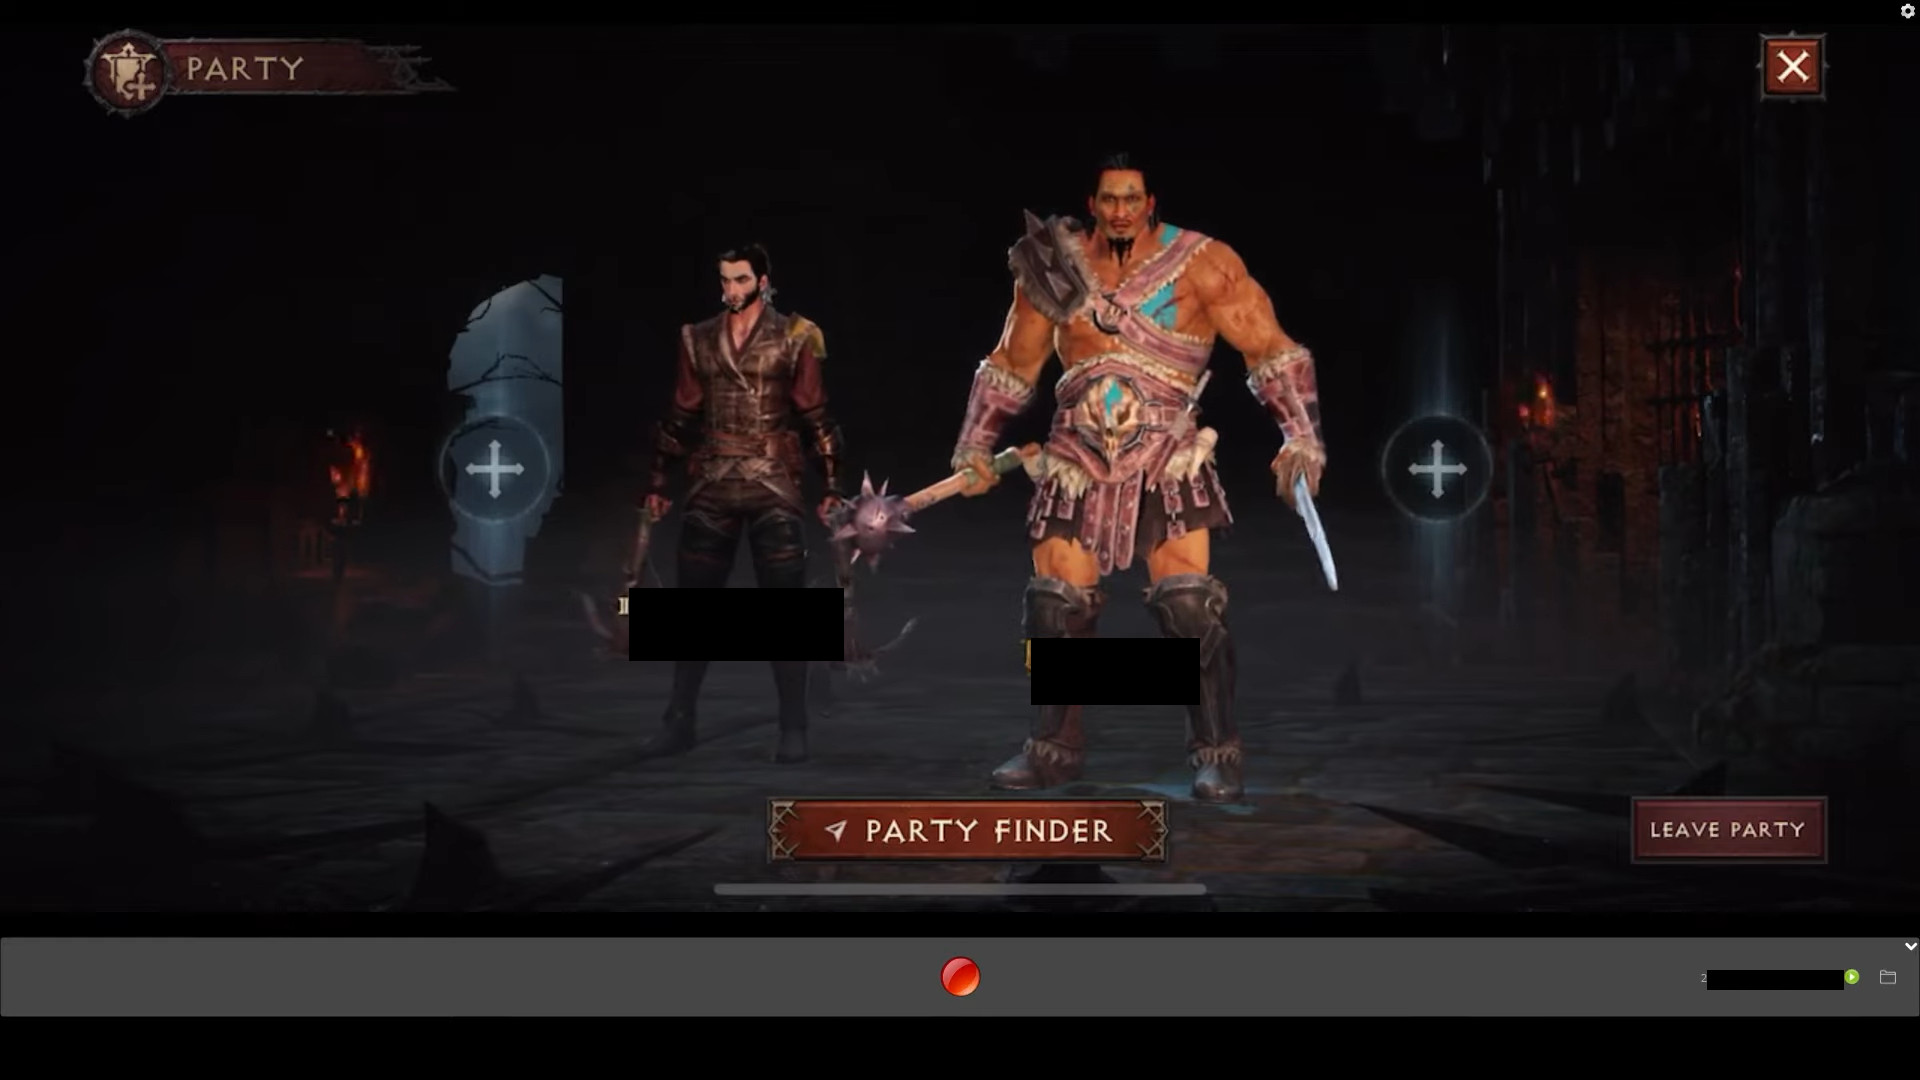 Diablo Immortal Review - The Game Statistics Authority